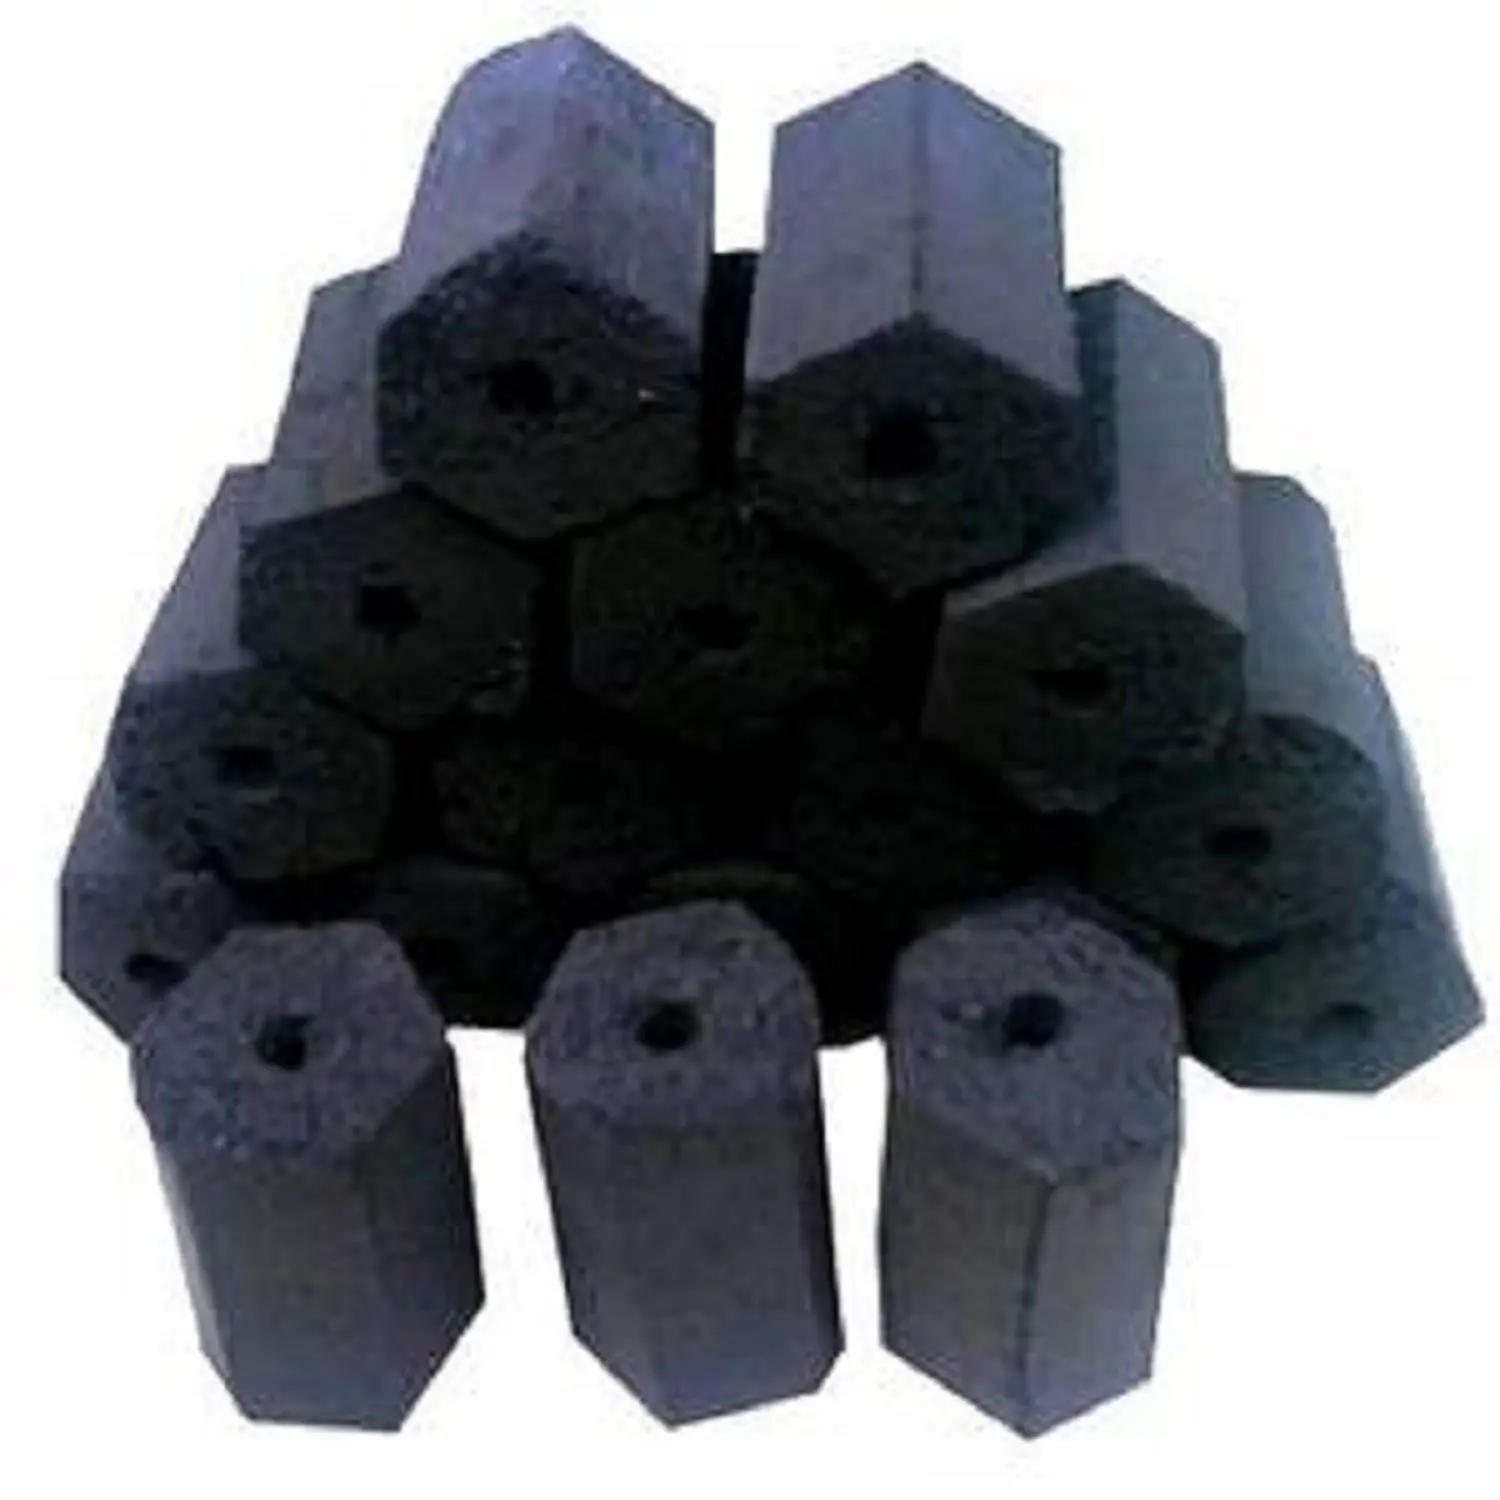 100% Natural Burning Quick Lighting Smokeless High Density Barbeque Charcoal Briquette Hookah Hexagonal Charcoal For Sale